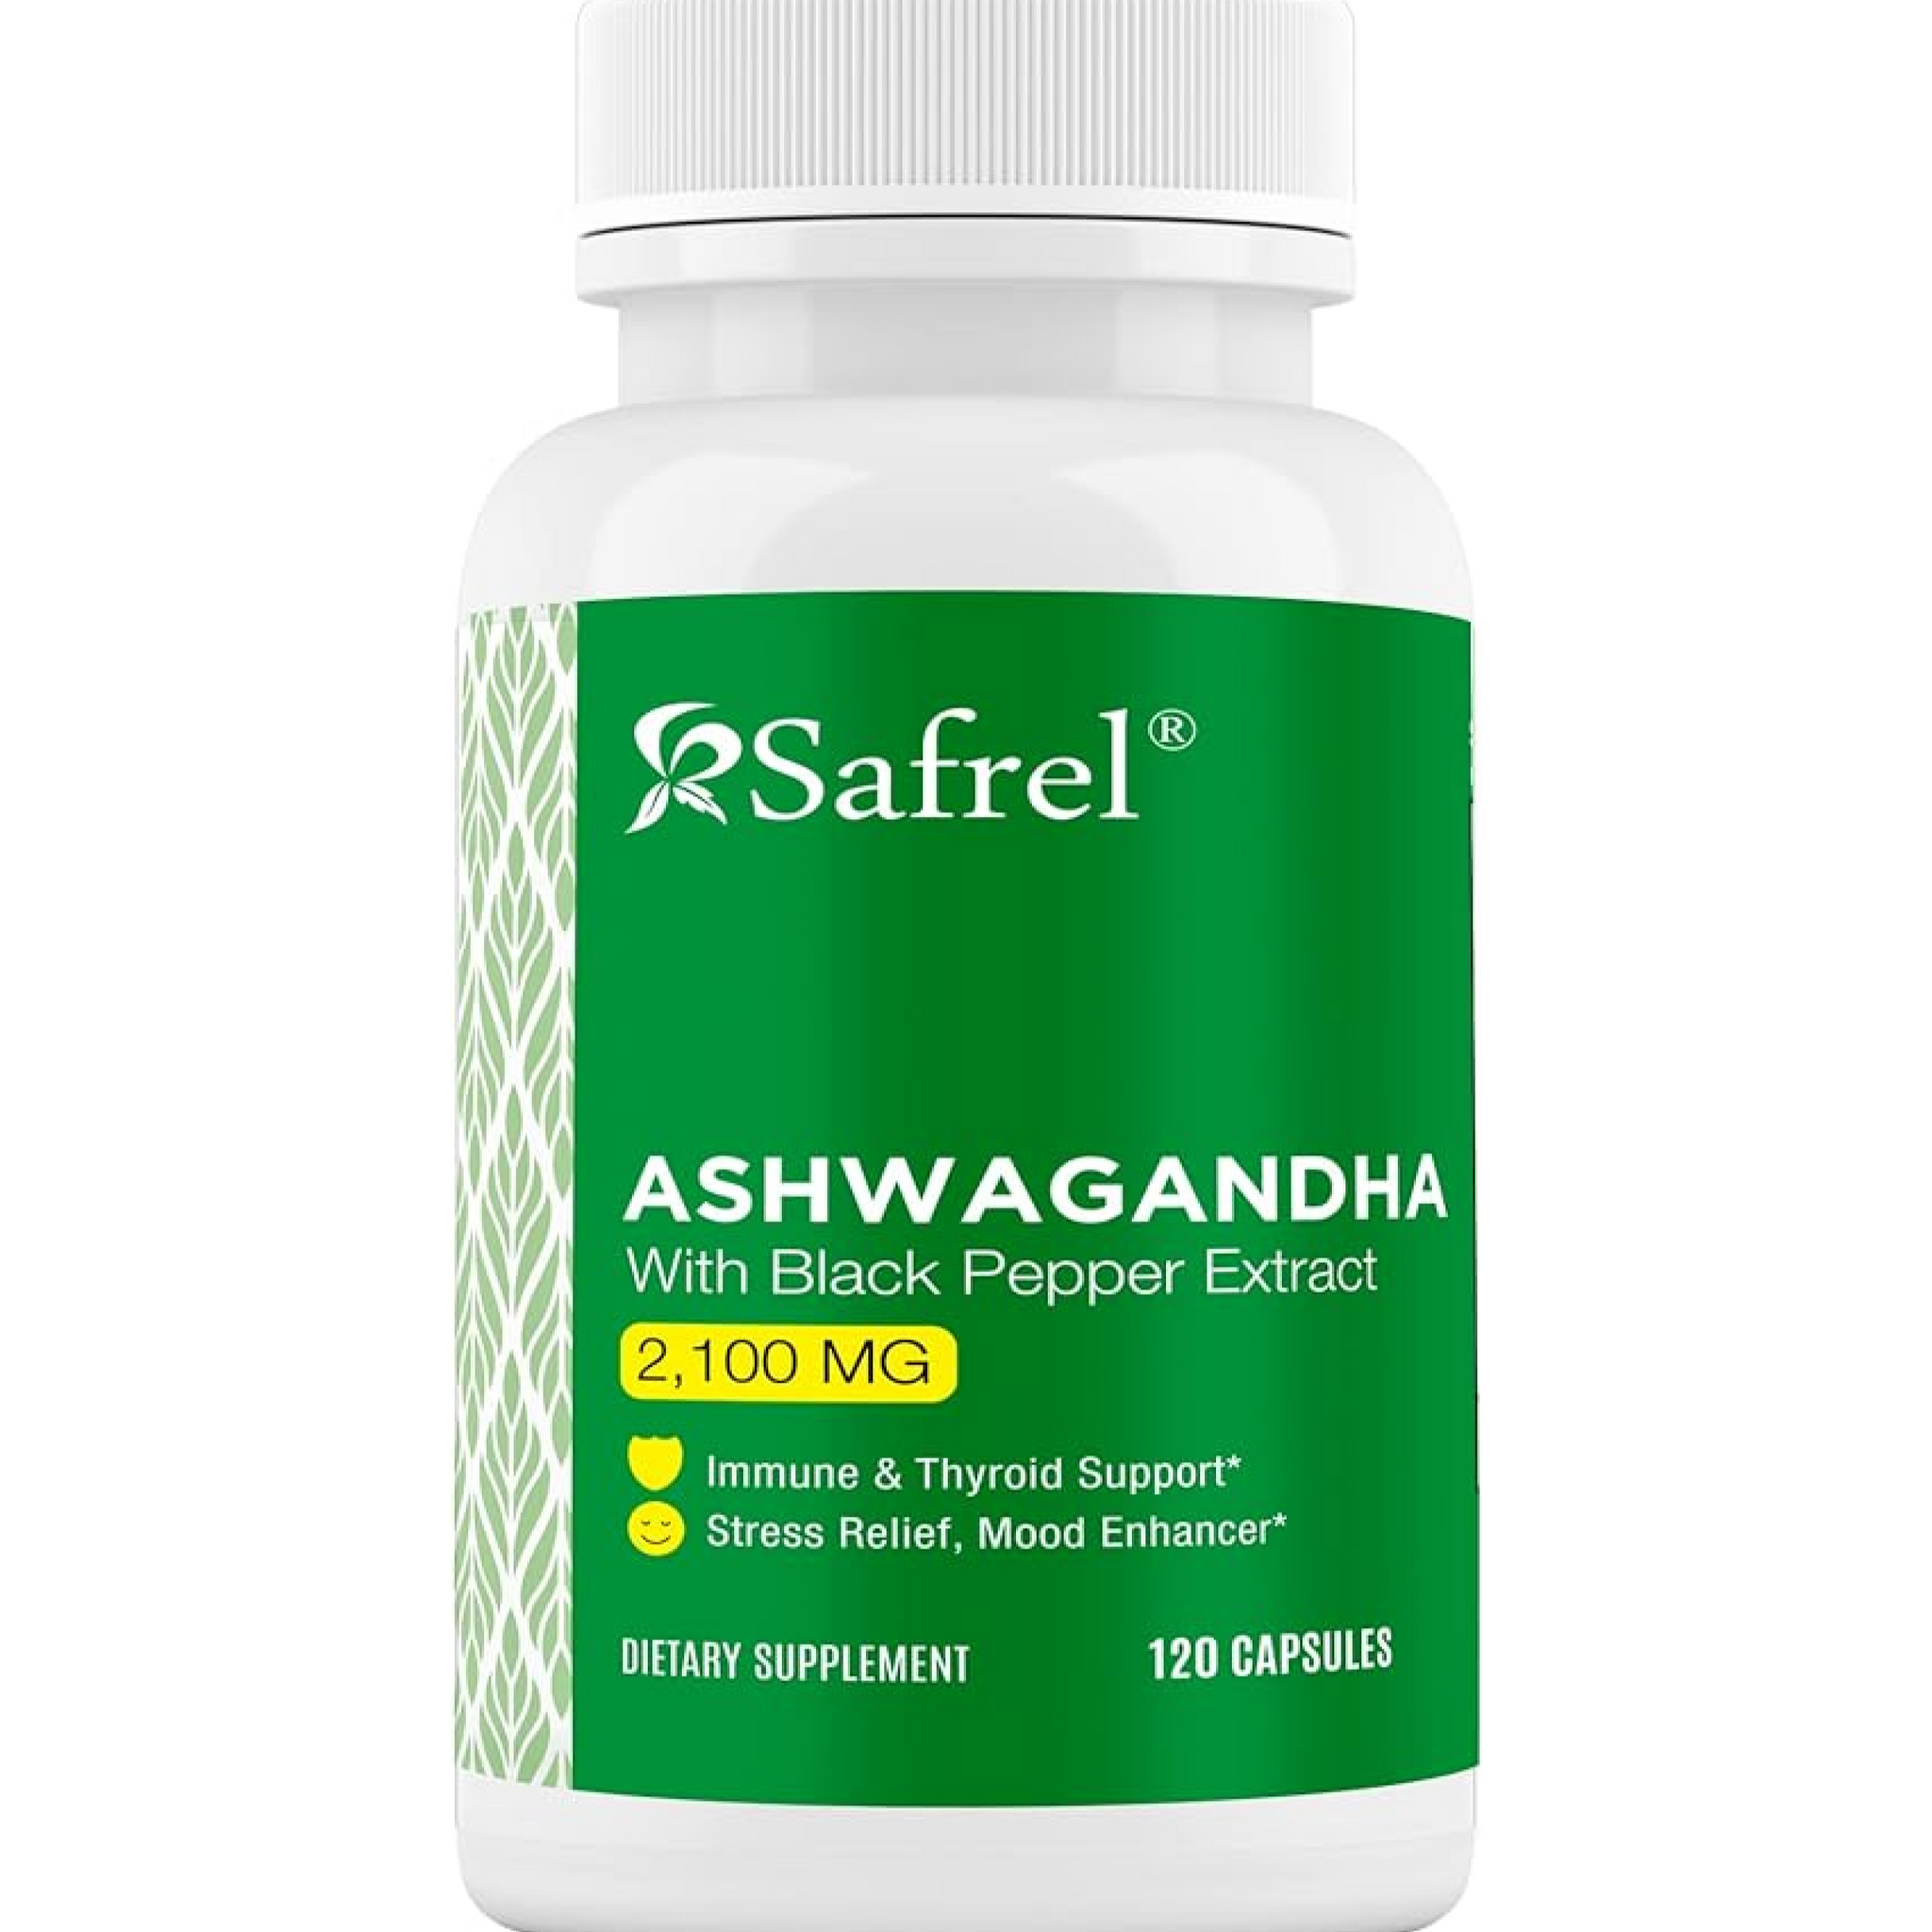 Safrel Organic Ashwagandha 2,100 mg - 120 Vegan Capsules, High Potency: Natural Sleep Support, Stress Relief, Mood Enhancer, Immune & Energy Support Supplement with Black Pepper for Wellbeing and Vitality